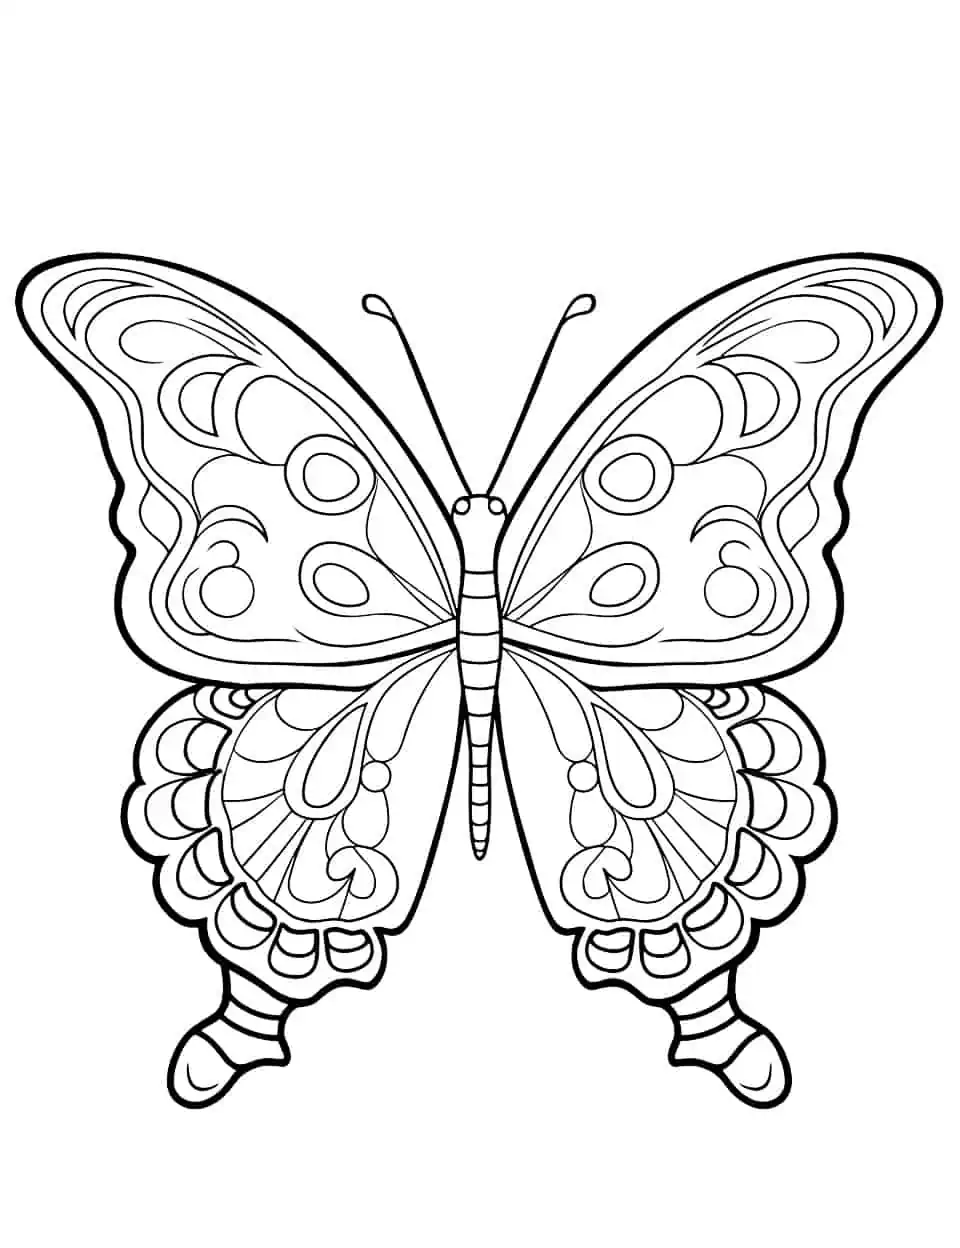 Imaginative Insect Butterfly Coloring Page - A coloring page featuring a whimsical butterfly design with imaginative patterns.